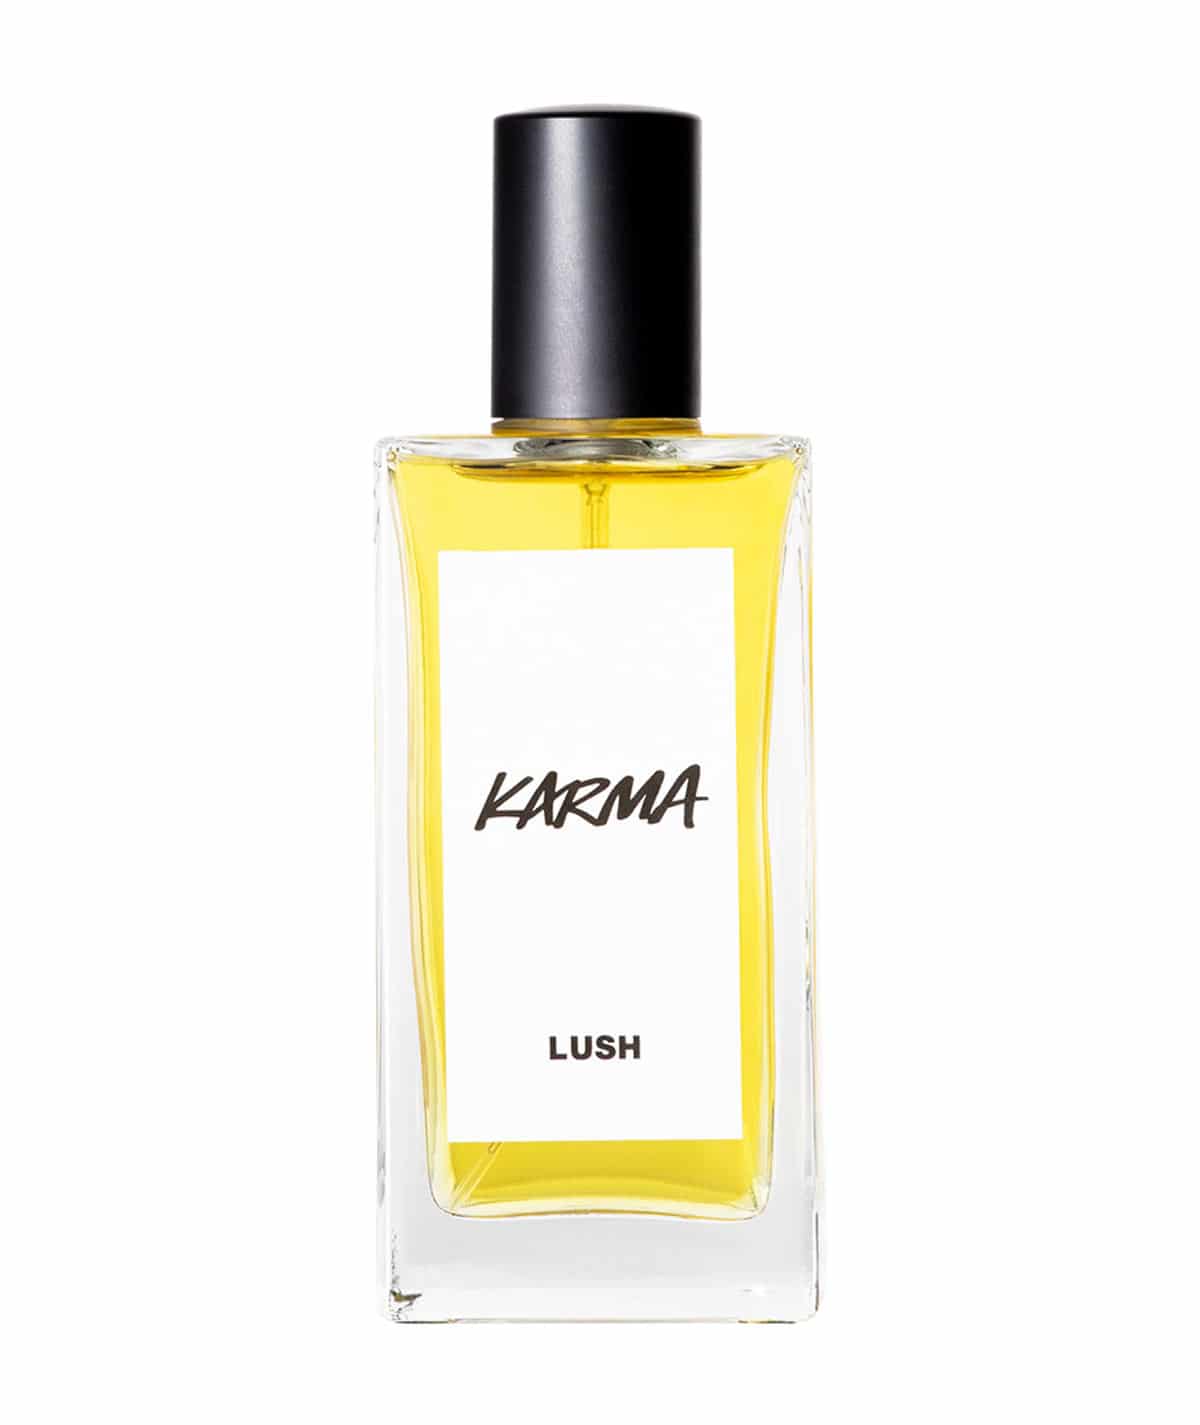 Best Cheap Perfume For Ladies - FragranceReview.com